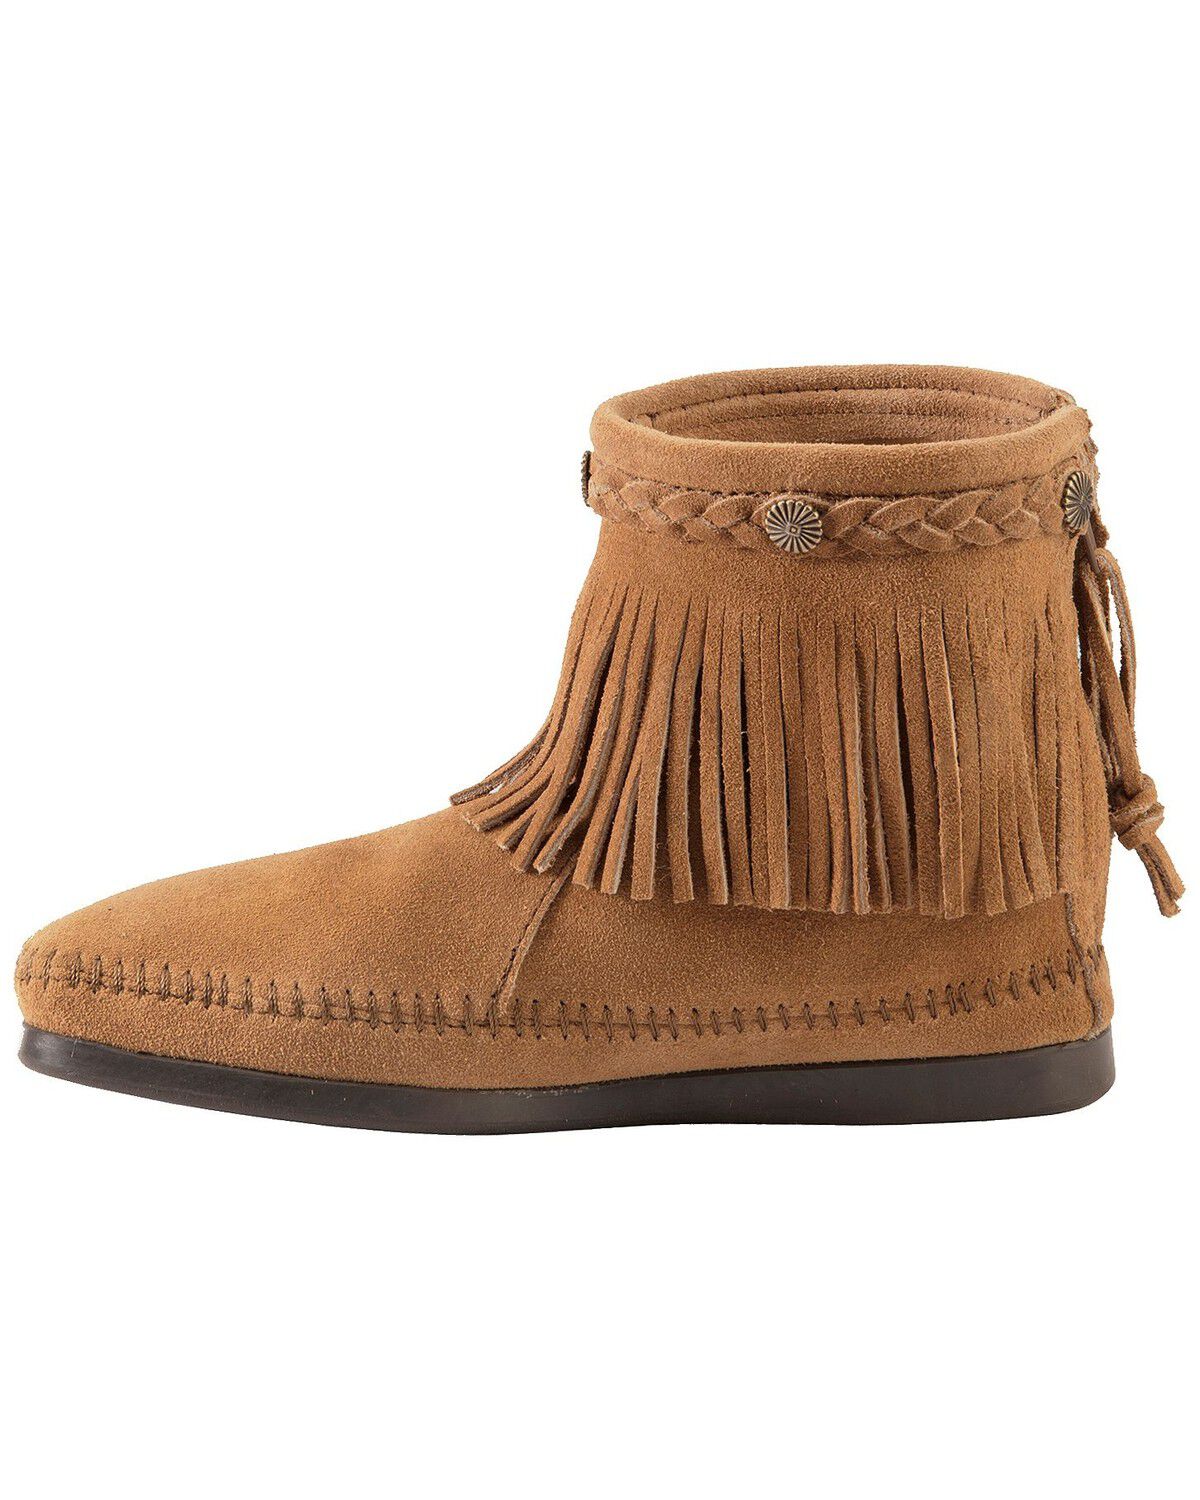 taupe moccasins